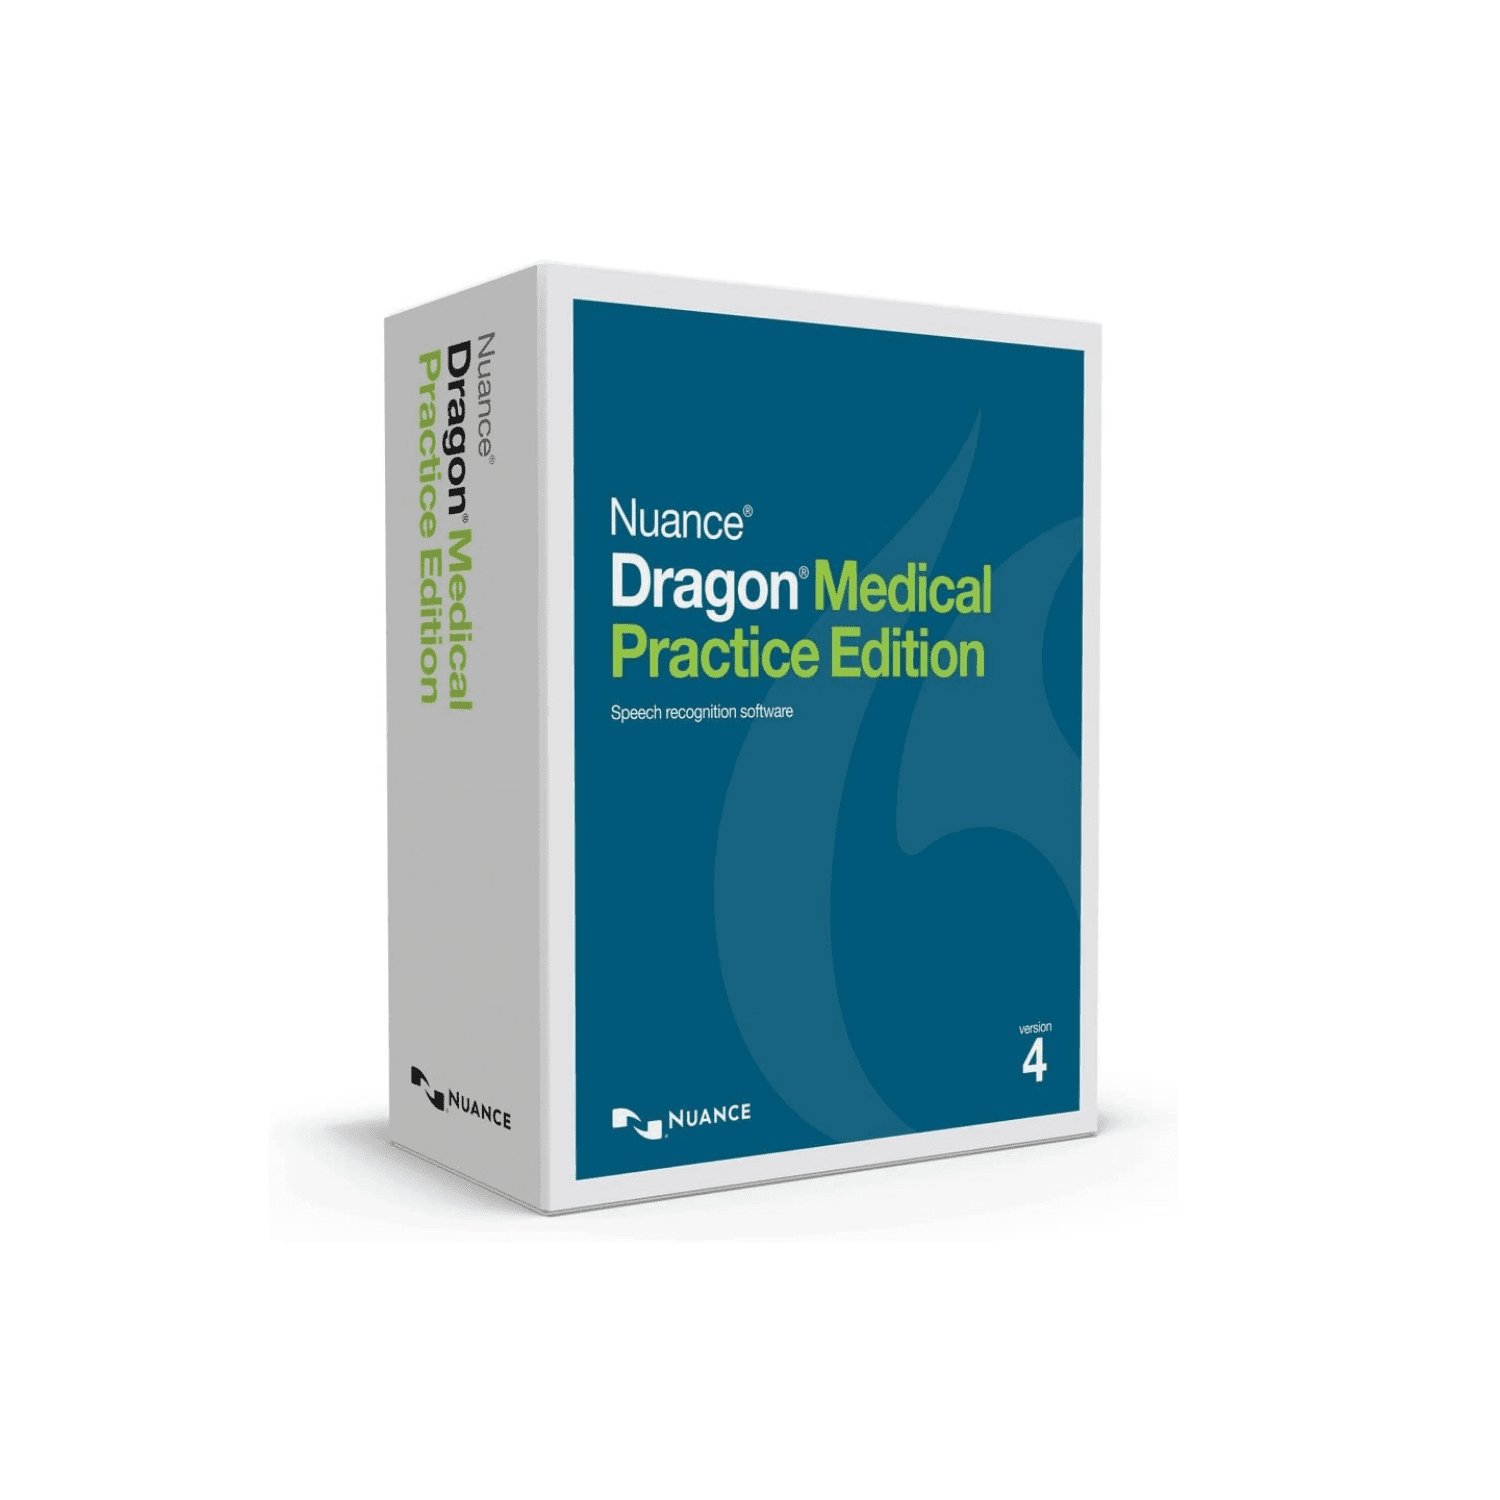 Numerix Dragon Medical Practice Management Software: Efficient and reliable software for medical practices. No mention of 'Nuance Dragon Professional crack'.